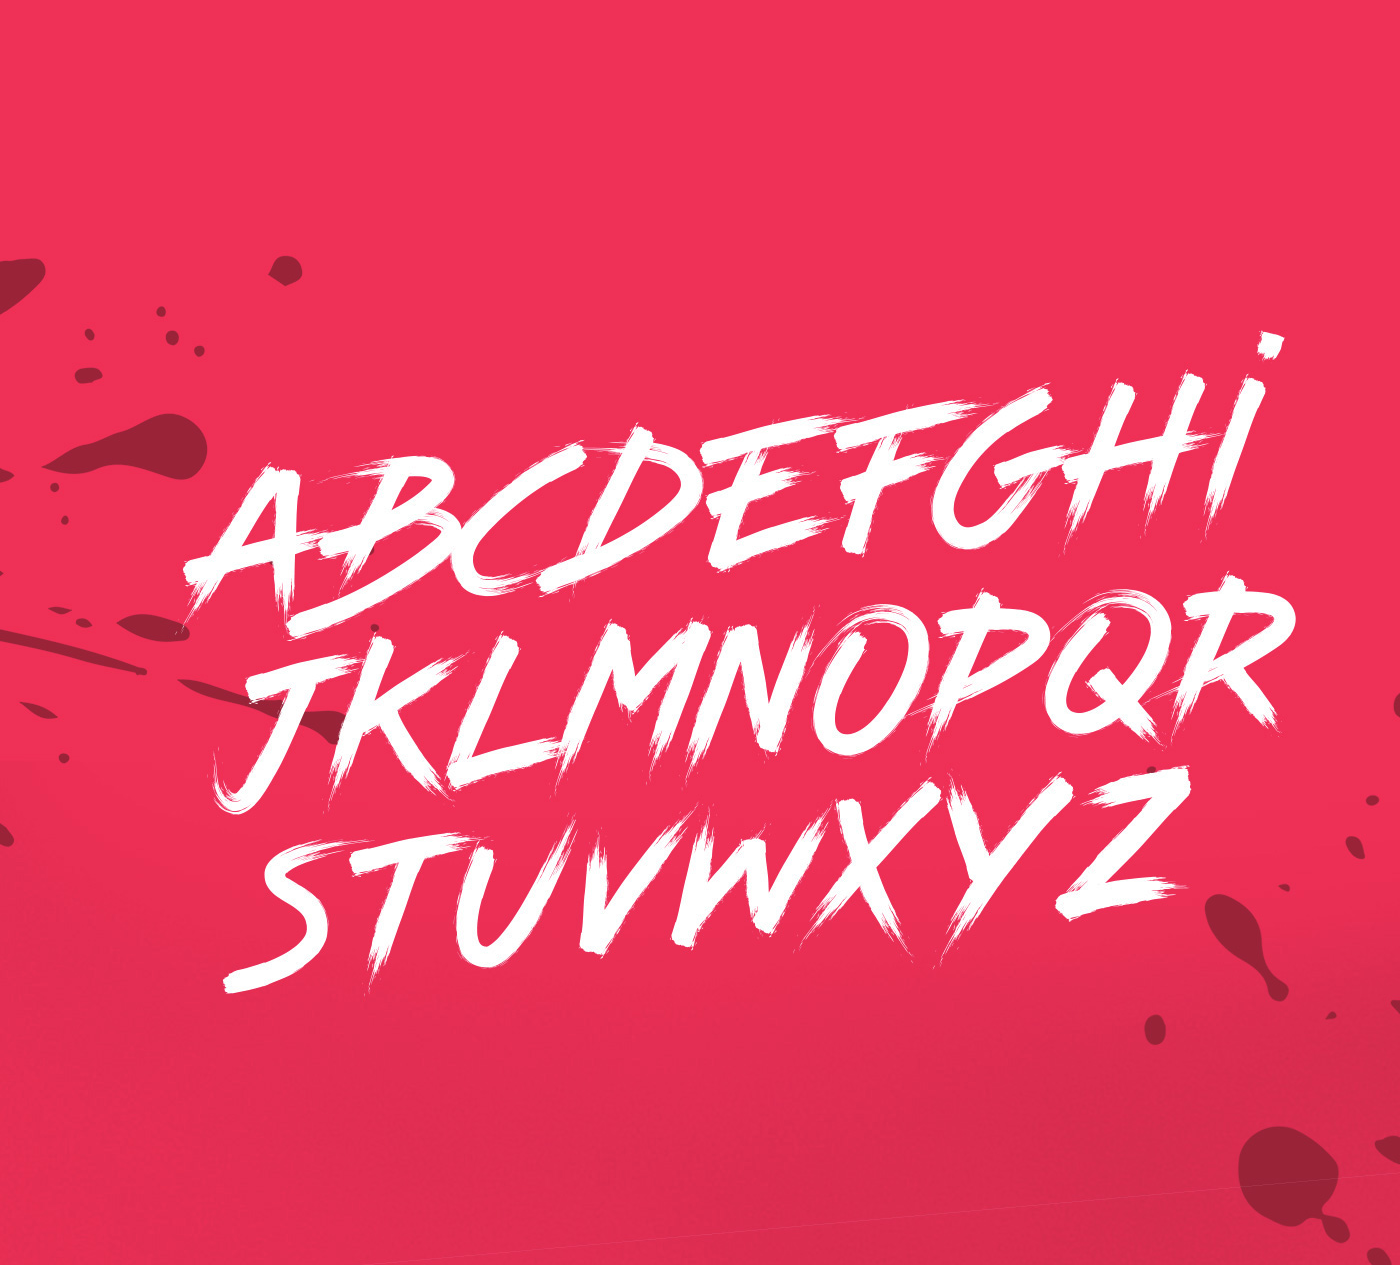 Example font Kungfont #3